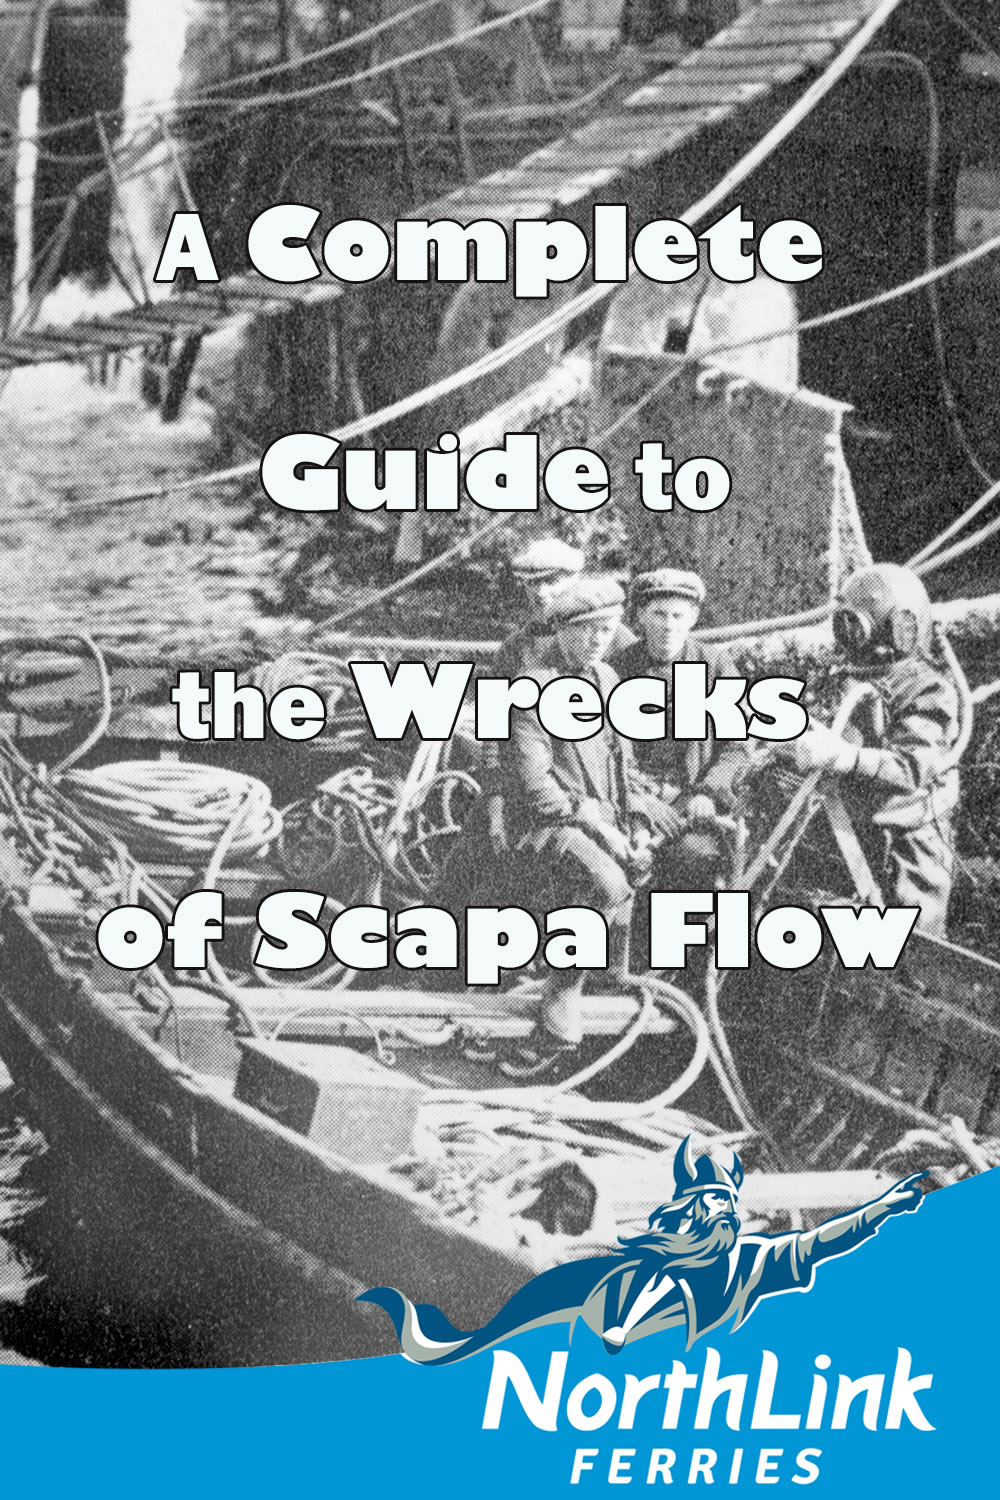 A Complete Guide to the Wrecks of Scapa Flow